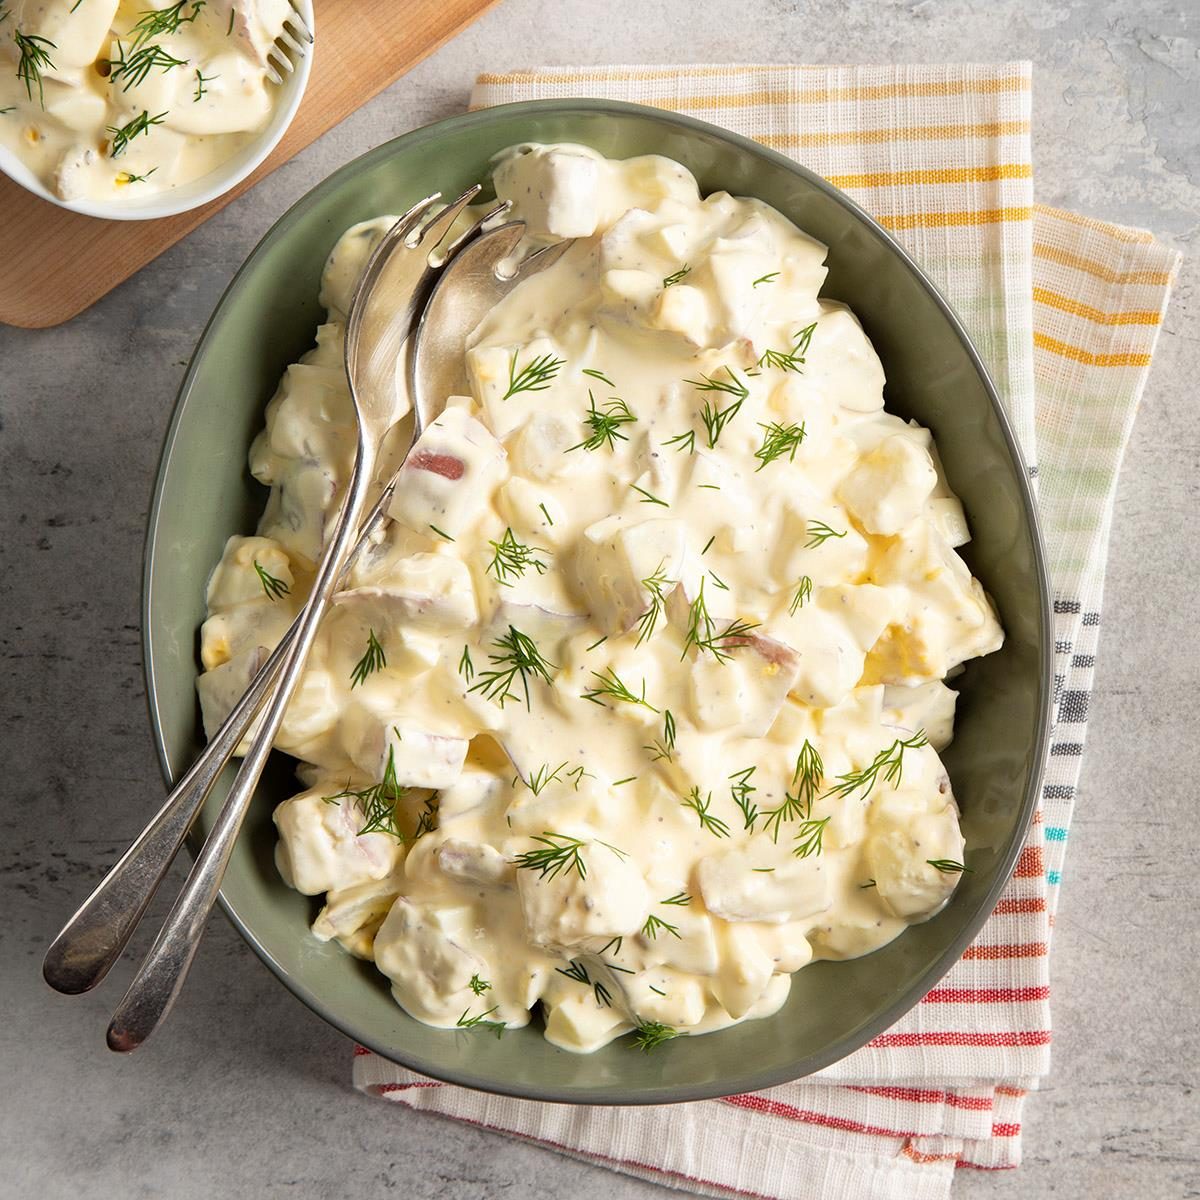 Contest Winning Old Fashioned Potato Salad Recipe How To